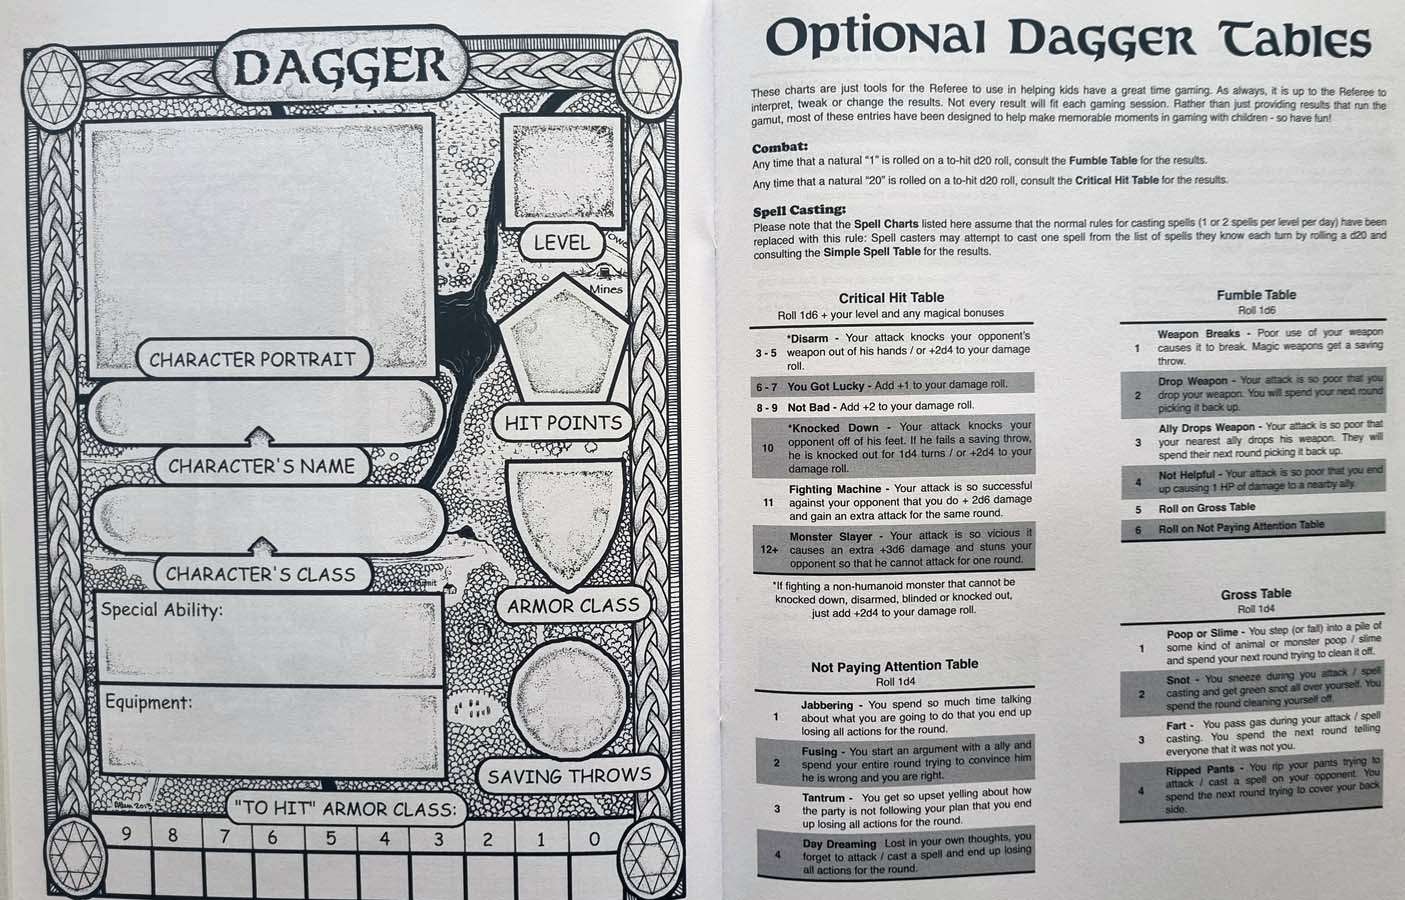 Dagger: A Toolkit for Fantasy Gaming with Kids